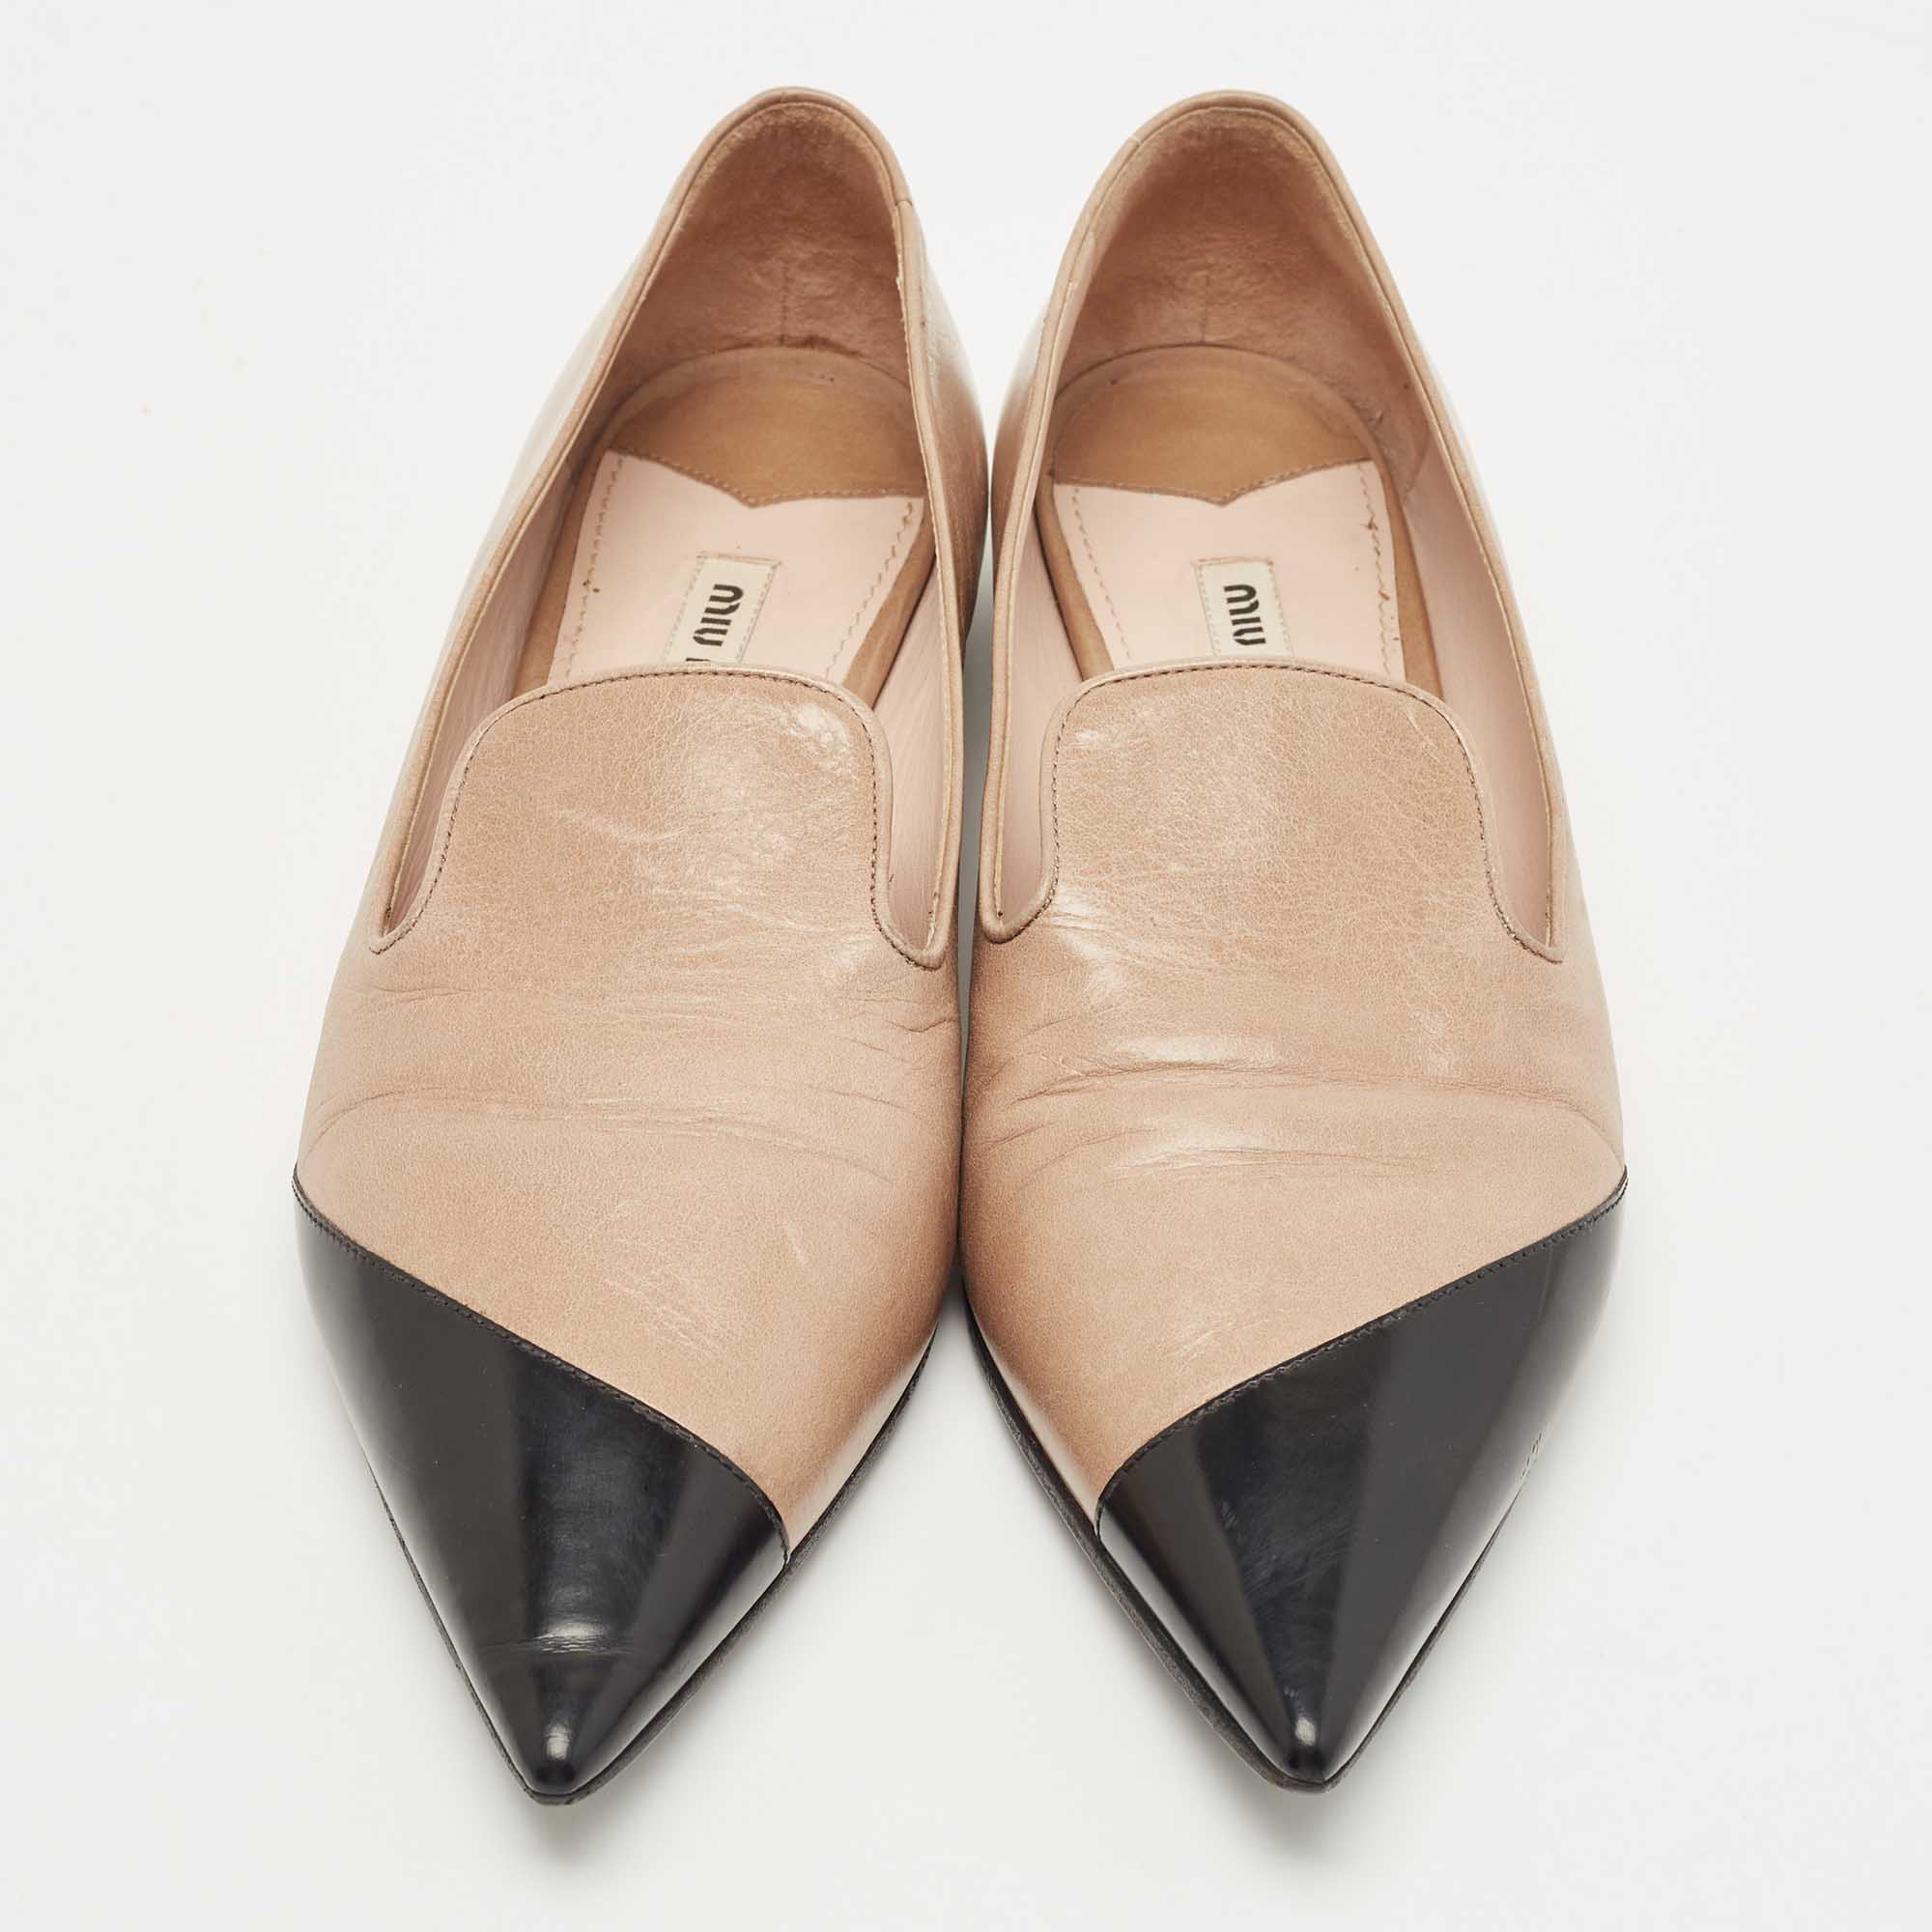 Miu Miu Light Brown/Black Leather Pointed Toe Loafers Size 40